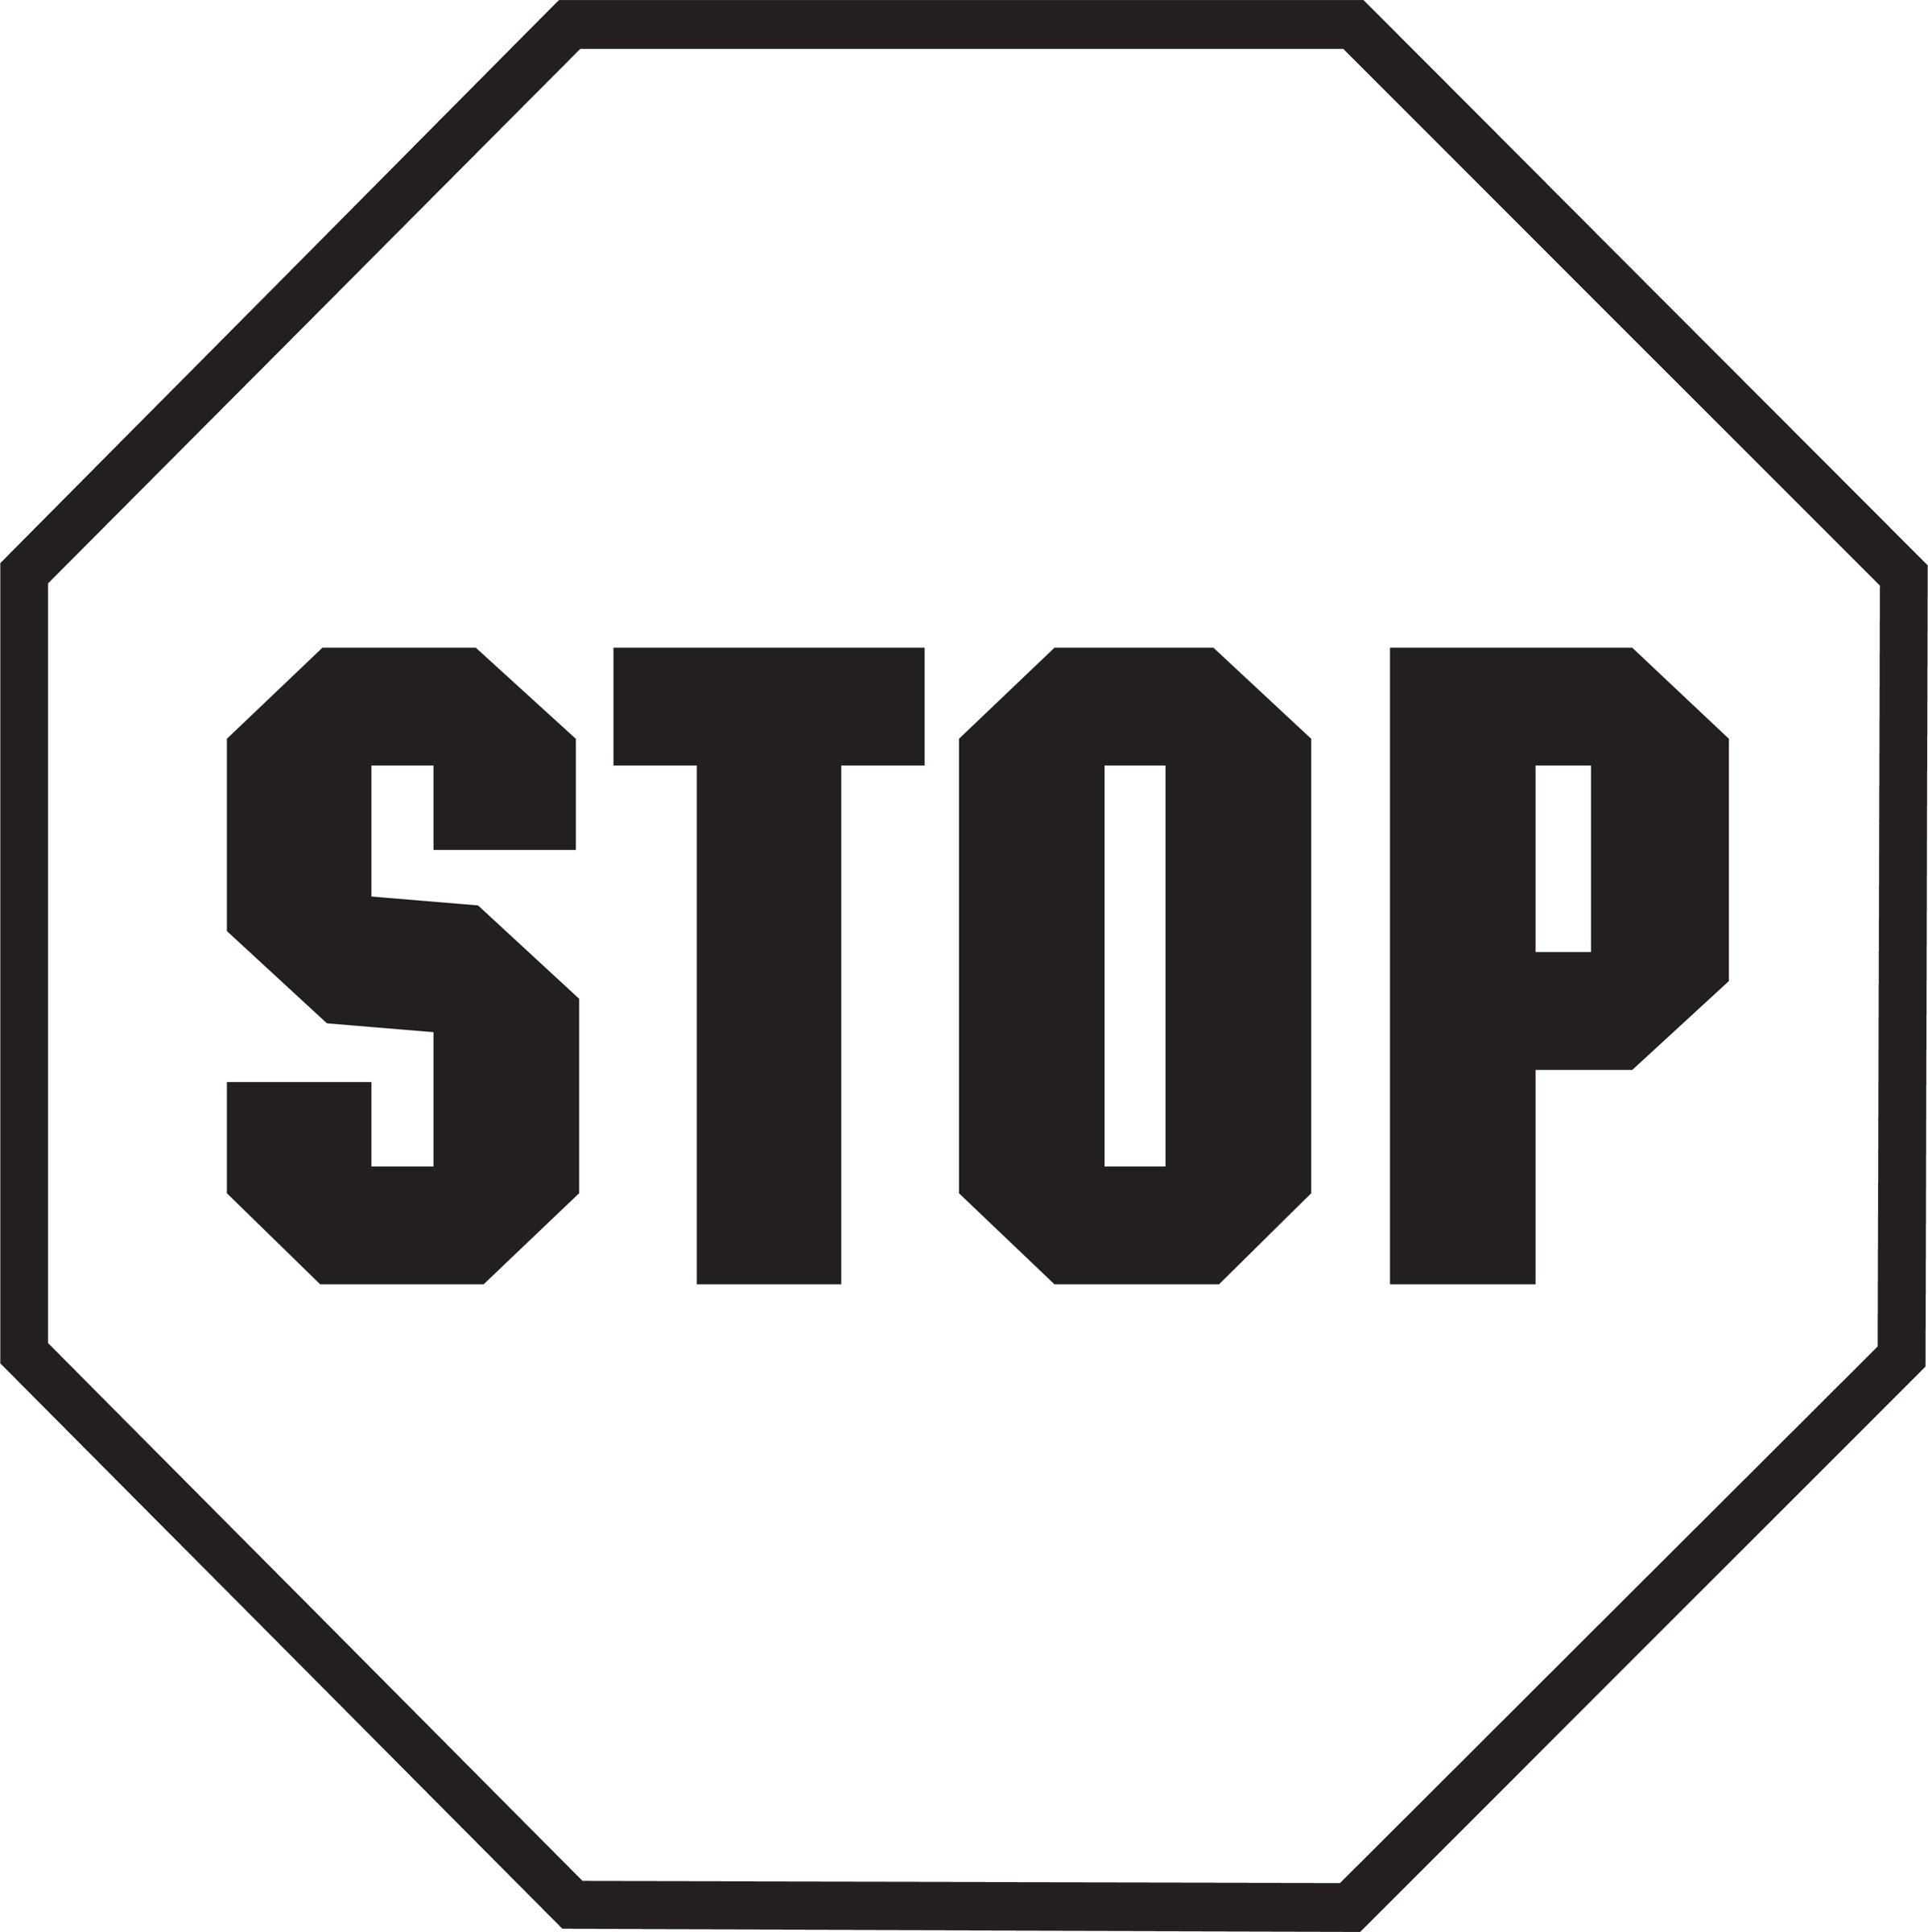 Stop Sign Template Printable - ClipArt Best